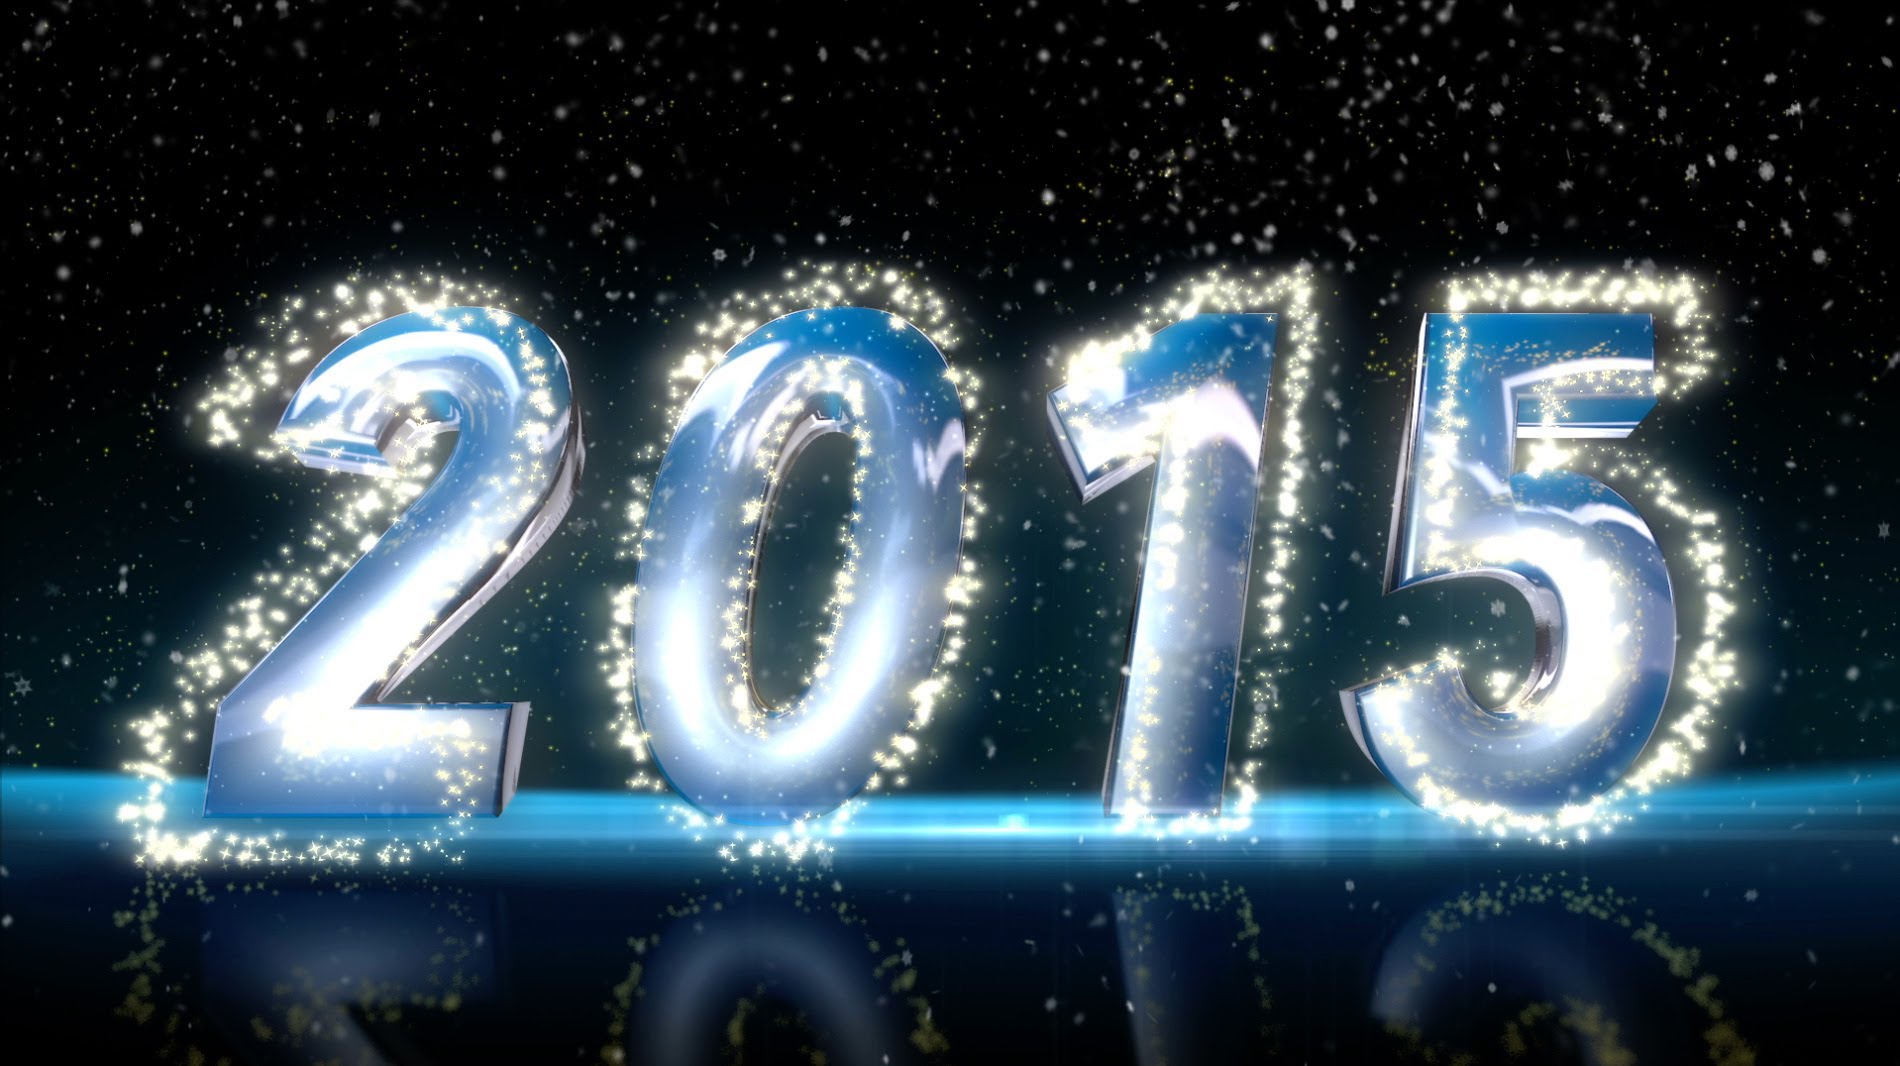 Nice Images Collection: New Year 2015 Desktop Wallpapers